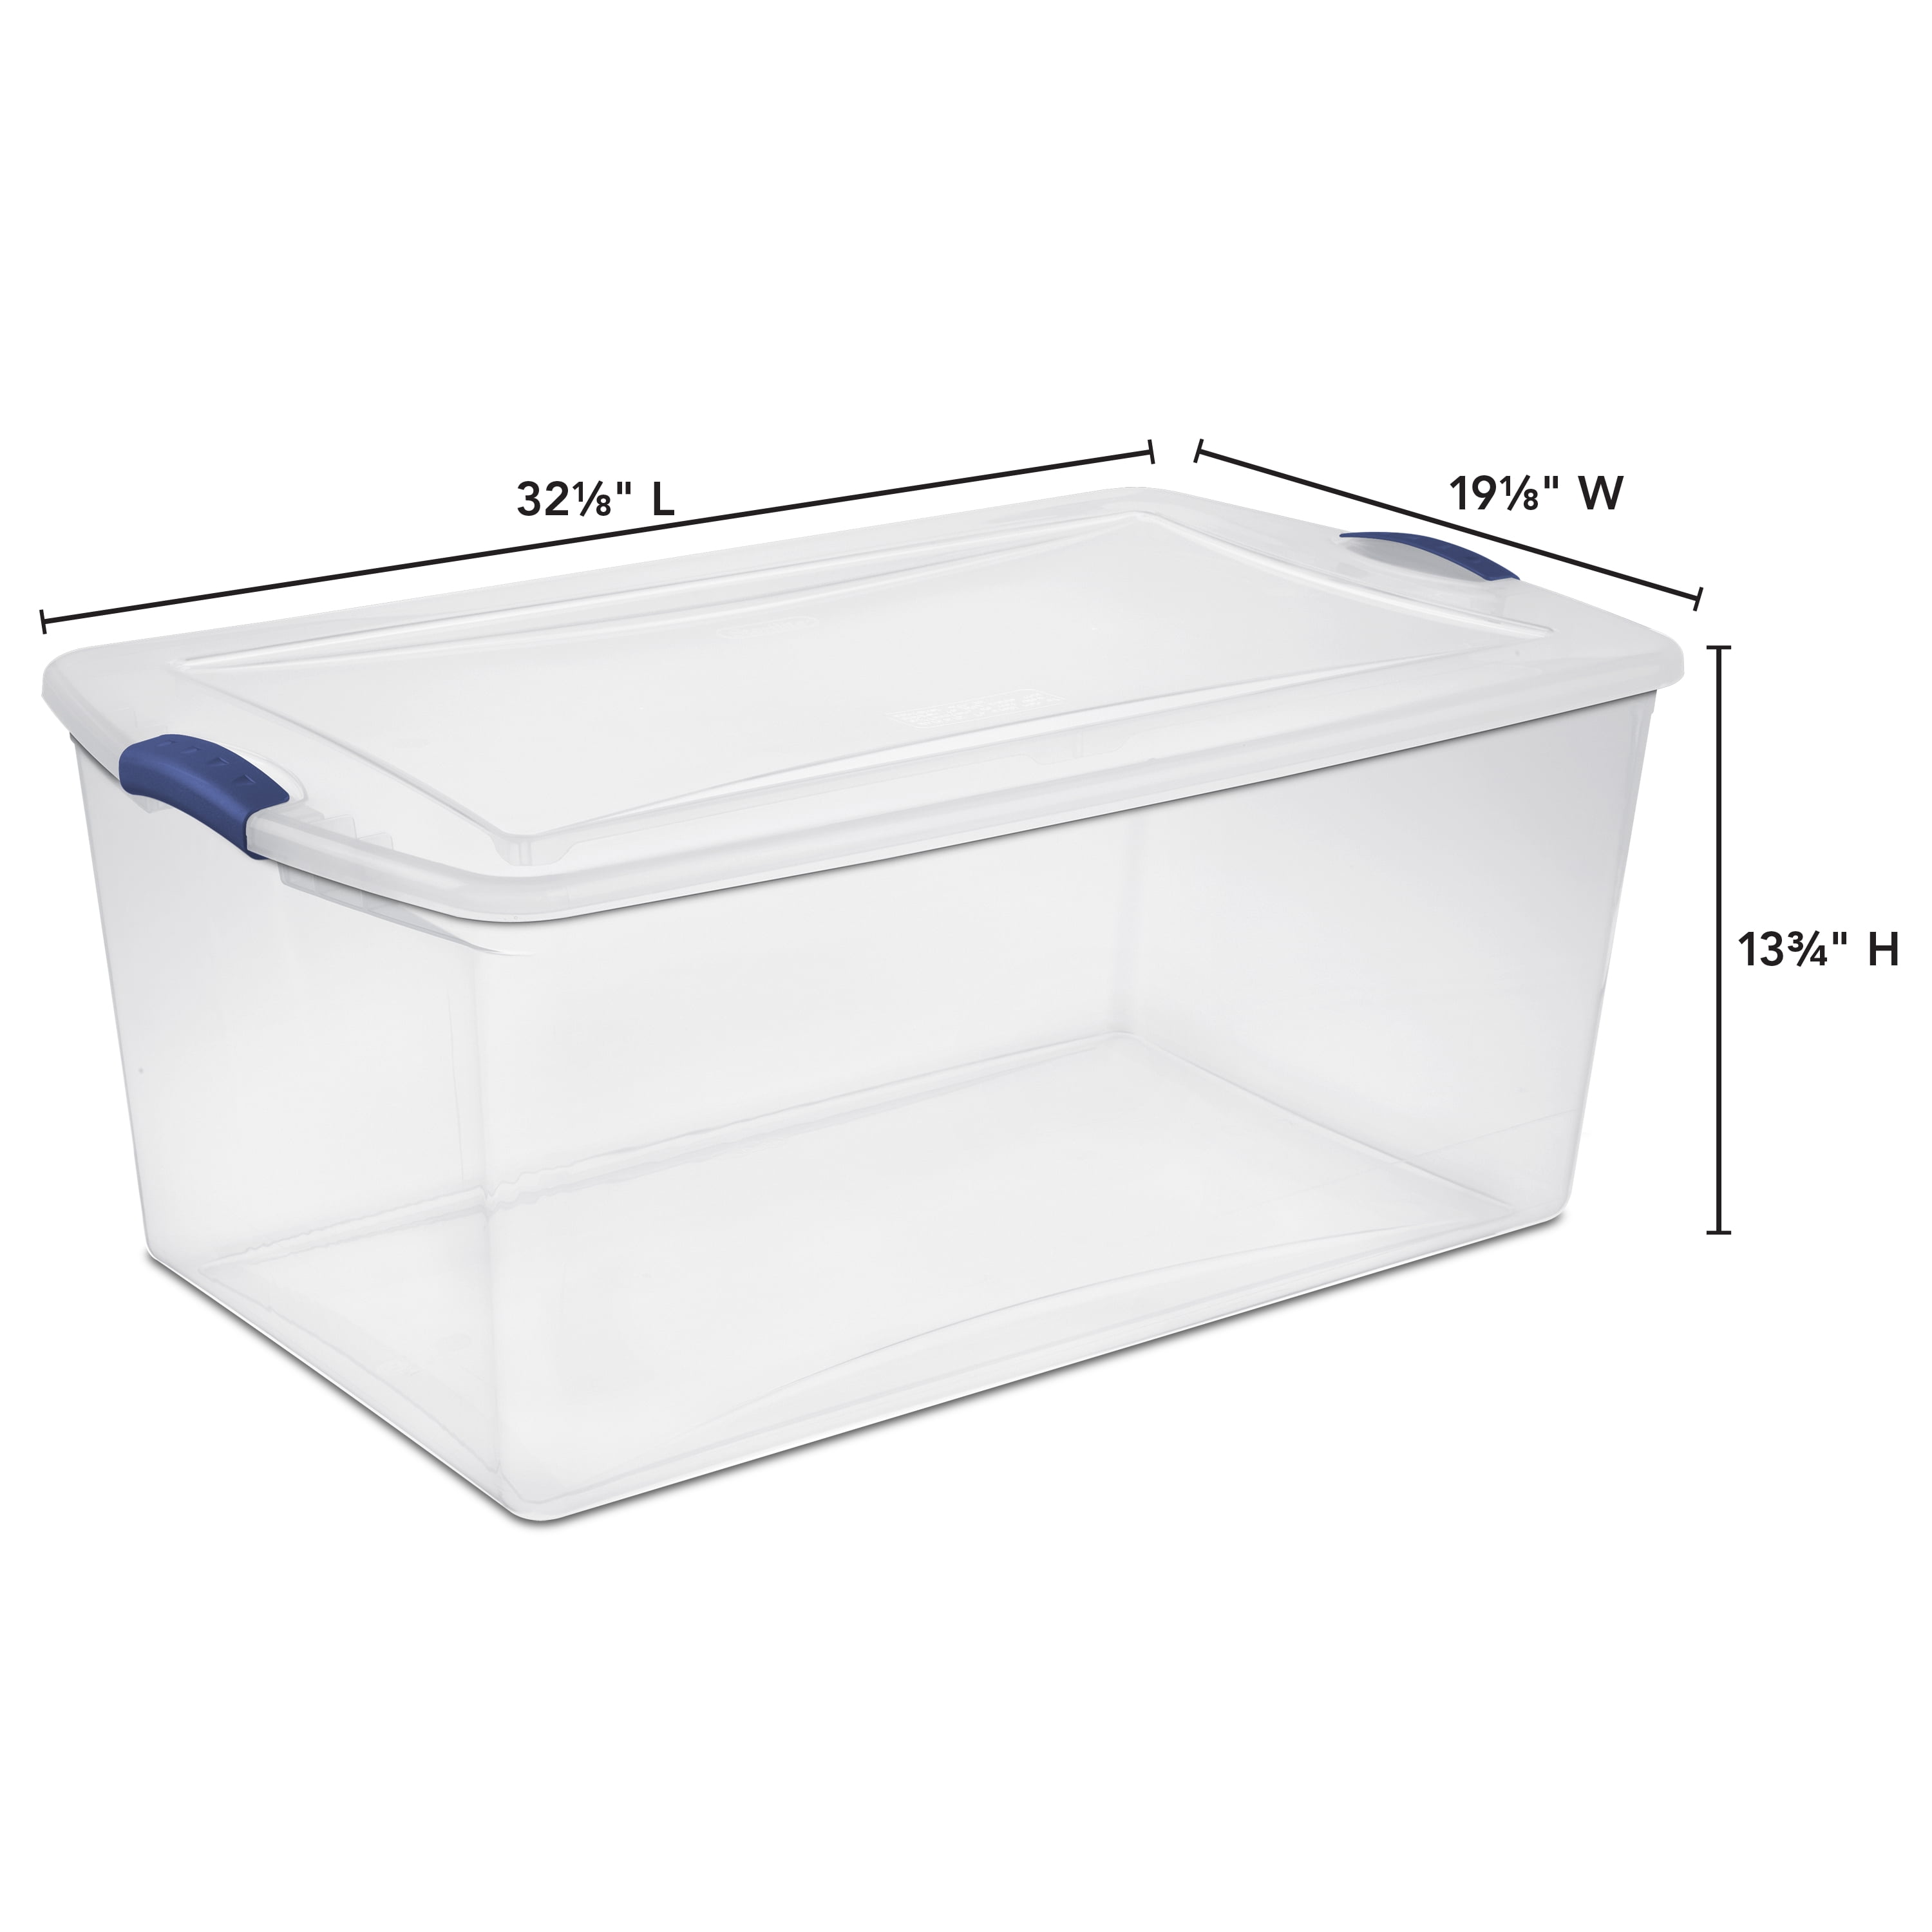 Sterilite 105 Qt. Clear Plastic Latching Box, Blue Latches with